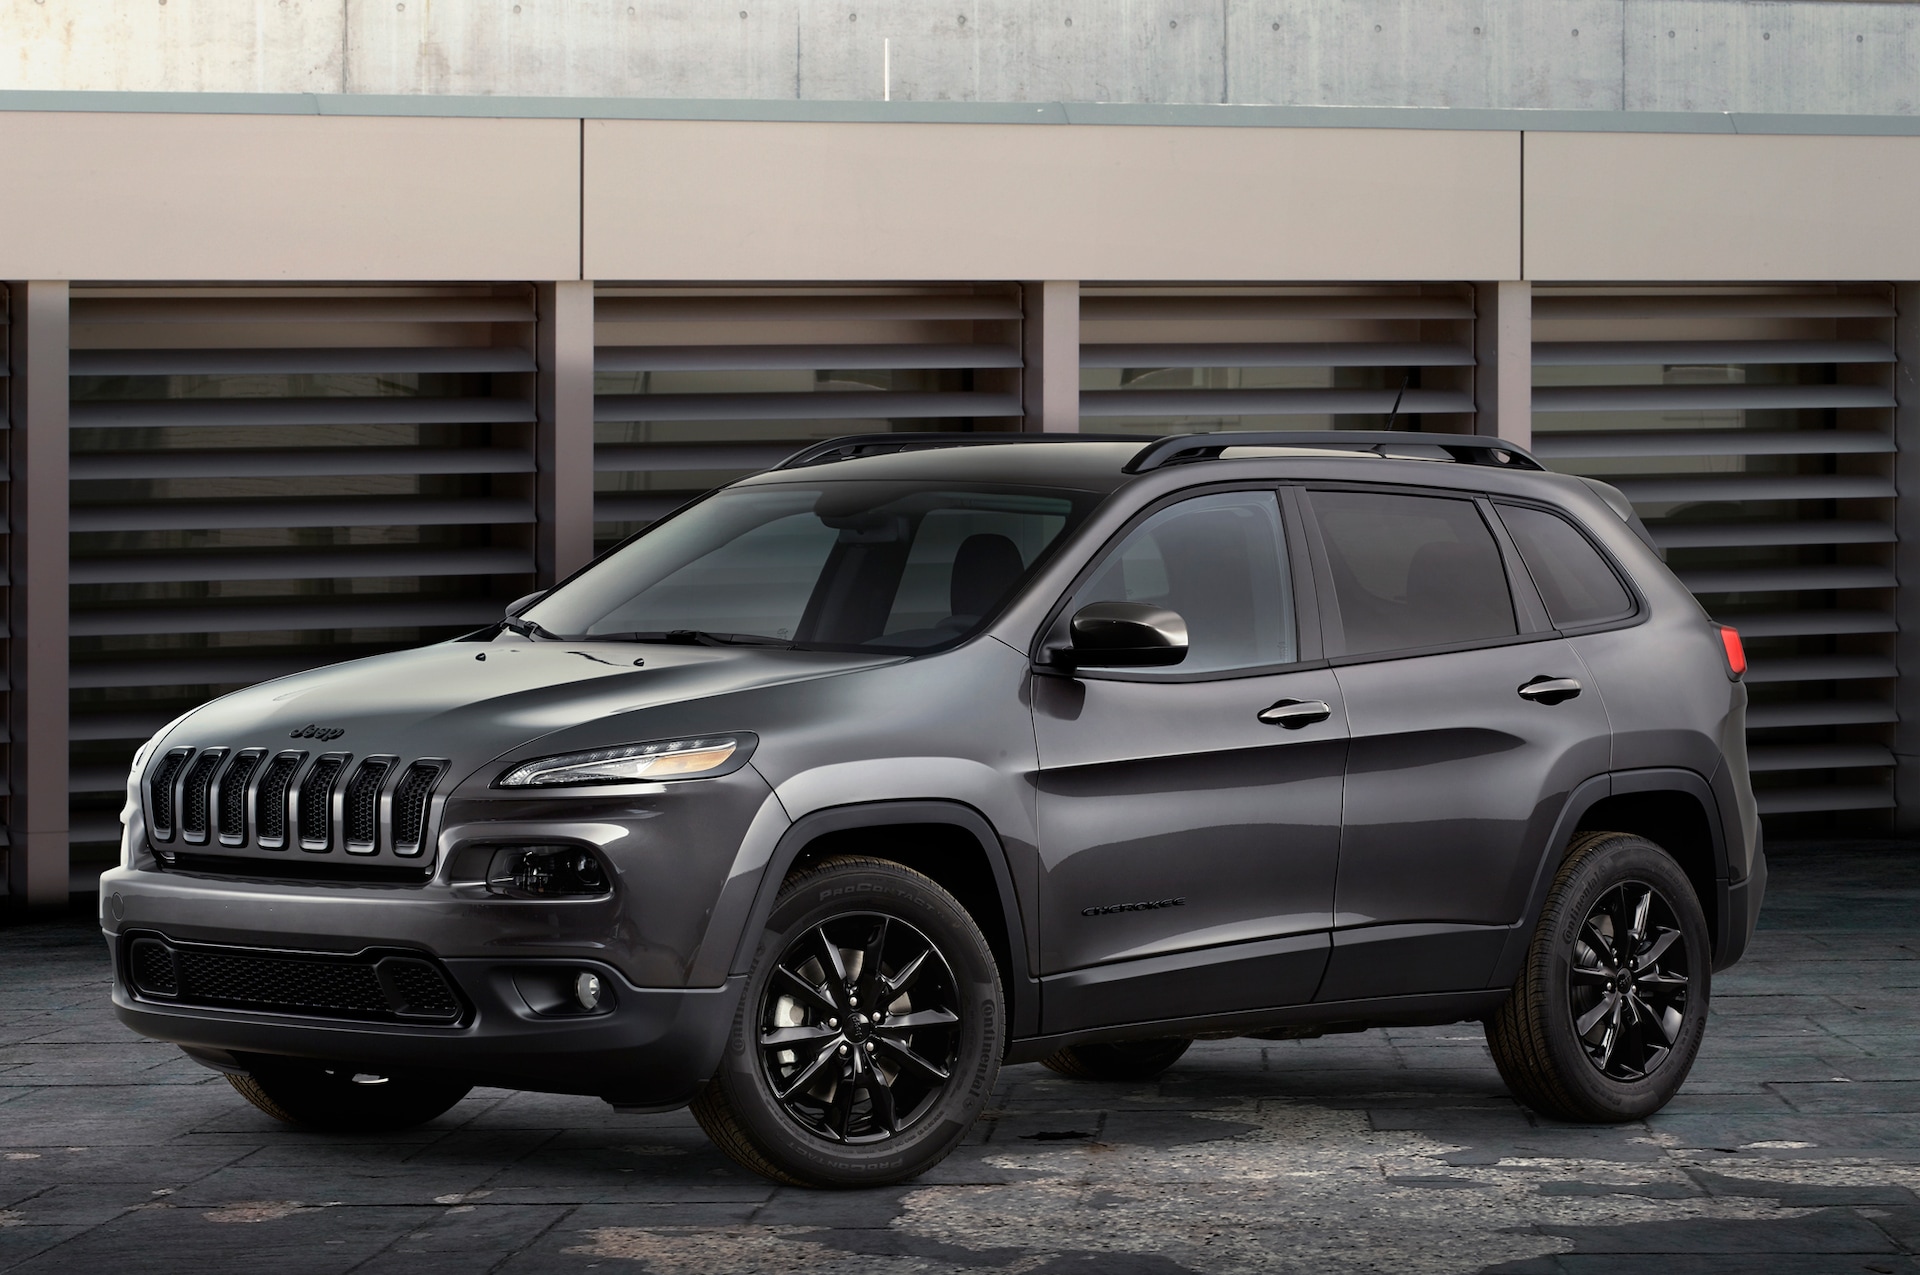 2014 Jeep Cherokee, Grand Cherokee, and Wrangler Gain Altitude Models for  2014